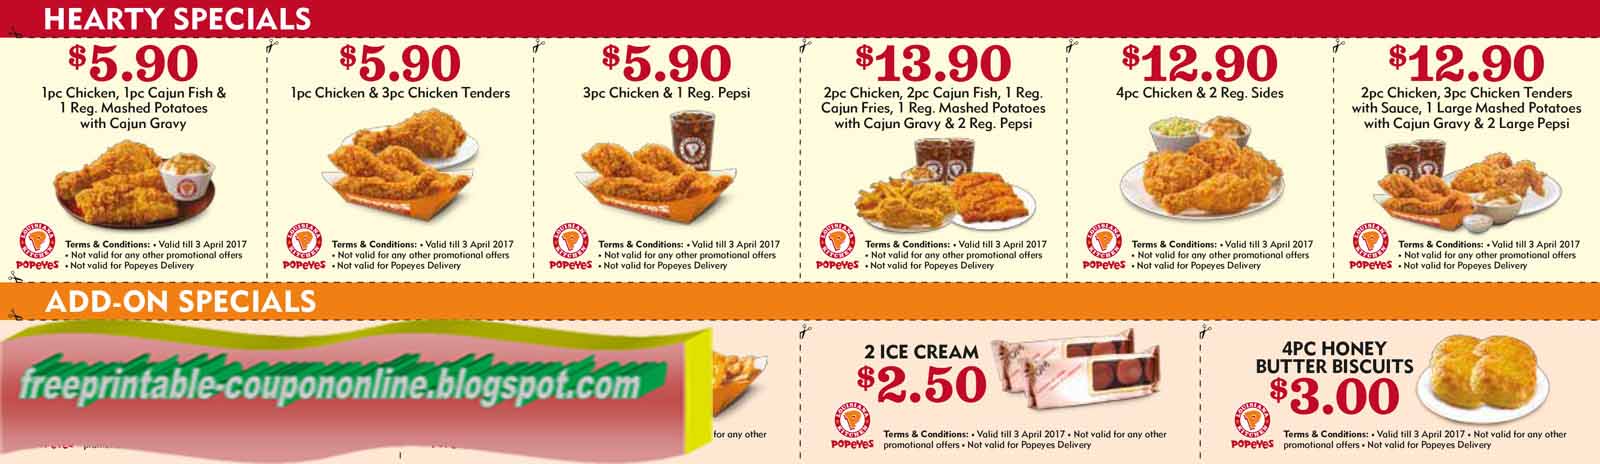 printable-coupons-2019-popeyes-chicken-coupons